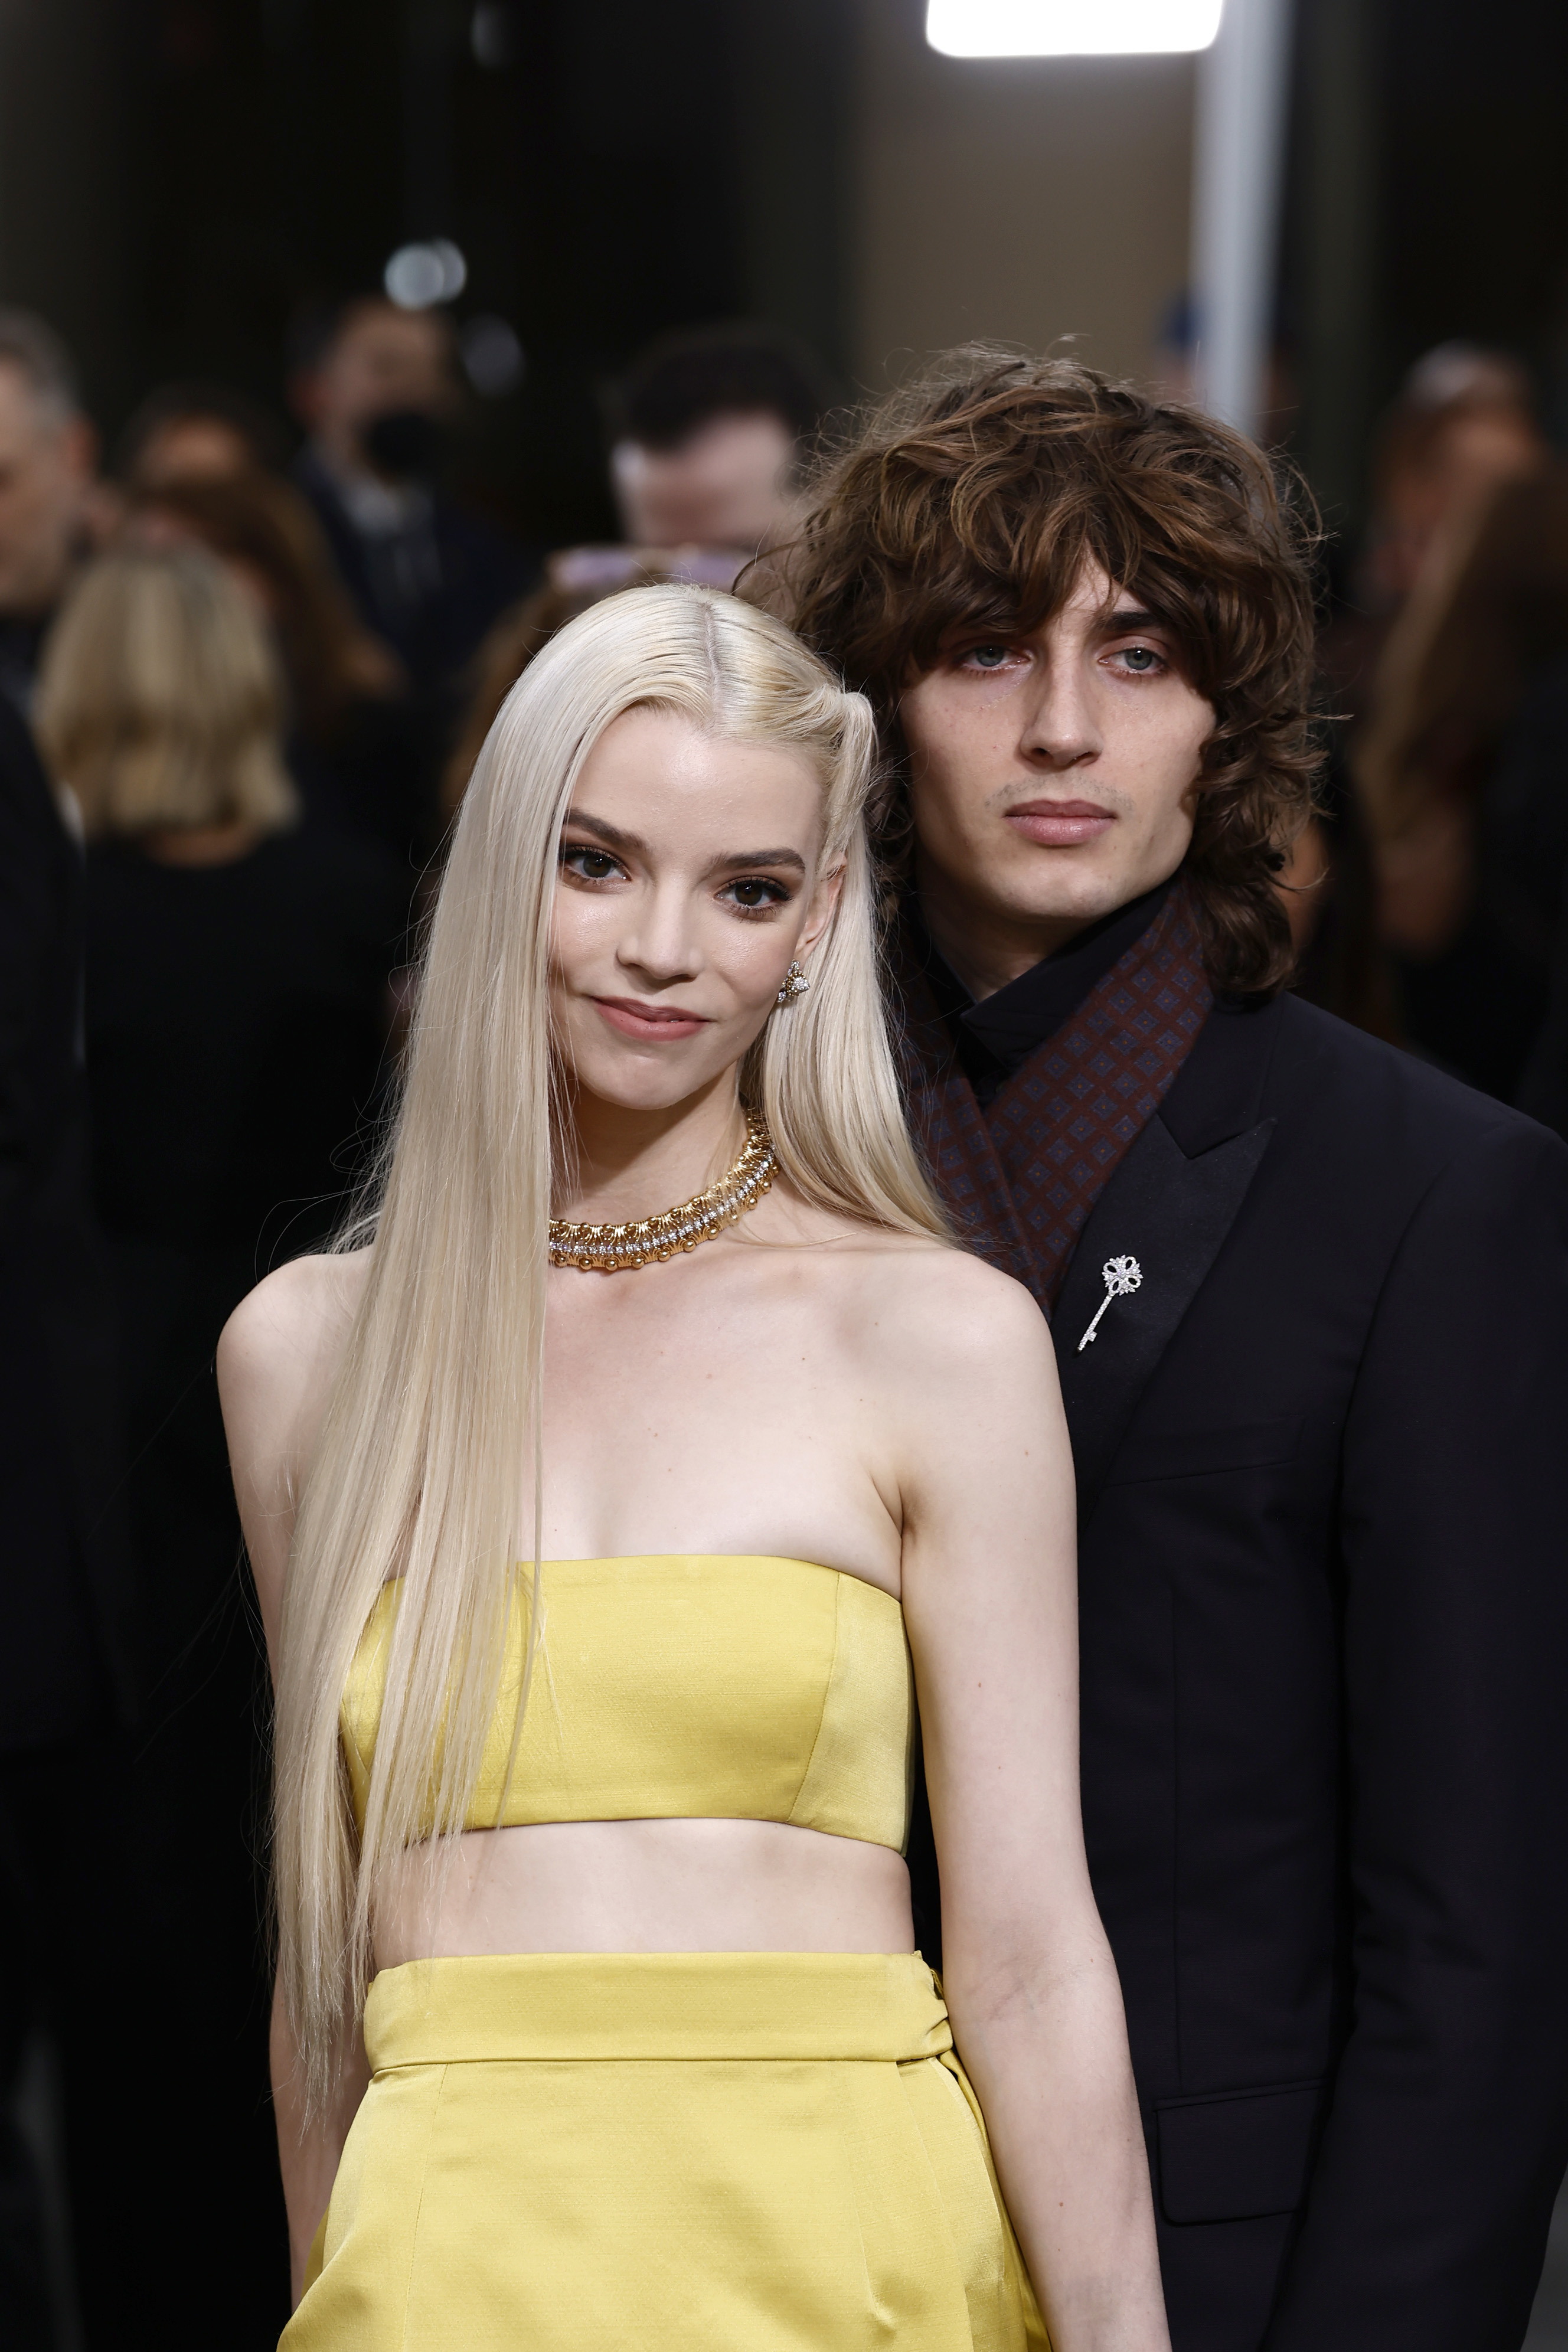 Two celebrities on red carpet; woman in strapless yellow dress with choker, man in black suit with patterned scarf